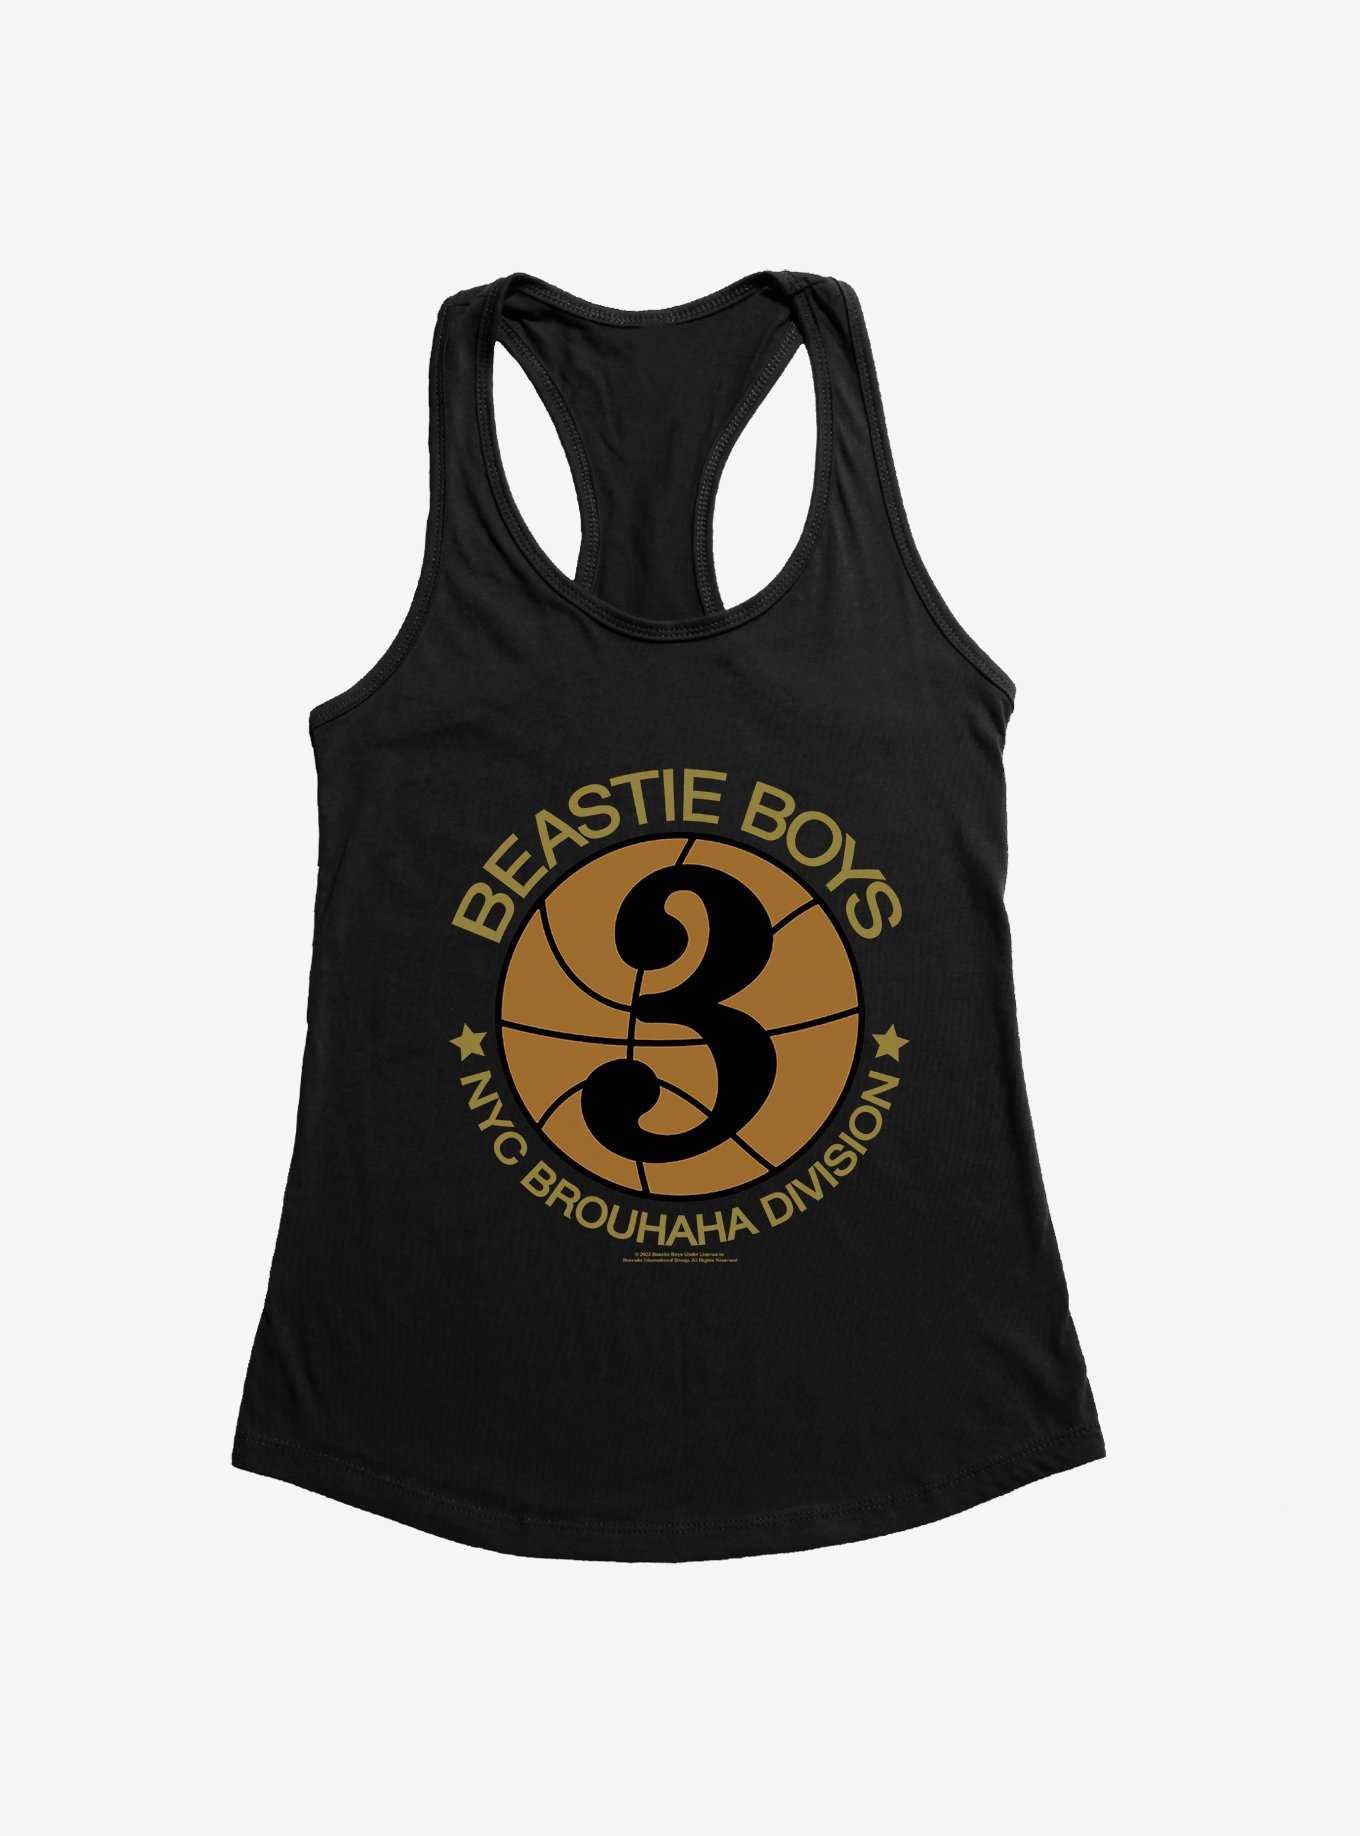 Beastie Boys NYC Brouhaha Division Womens Tank Top, , hi-res